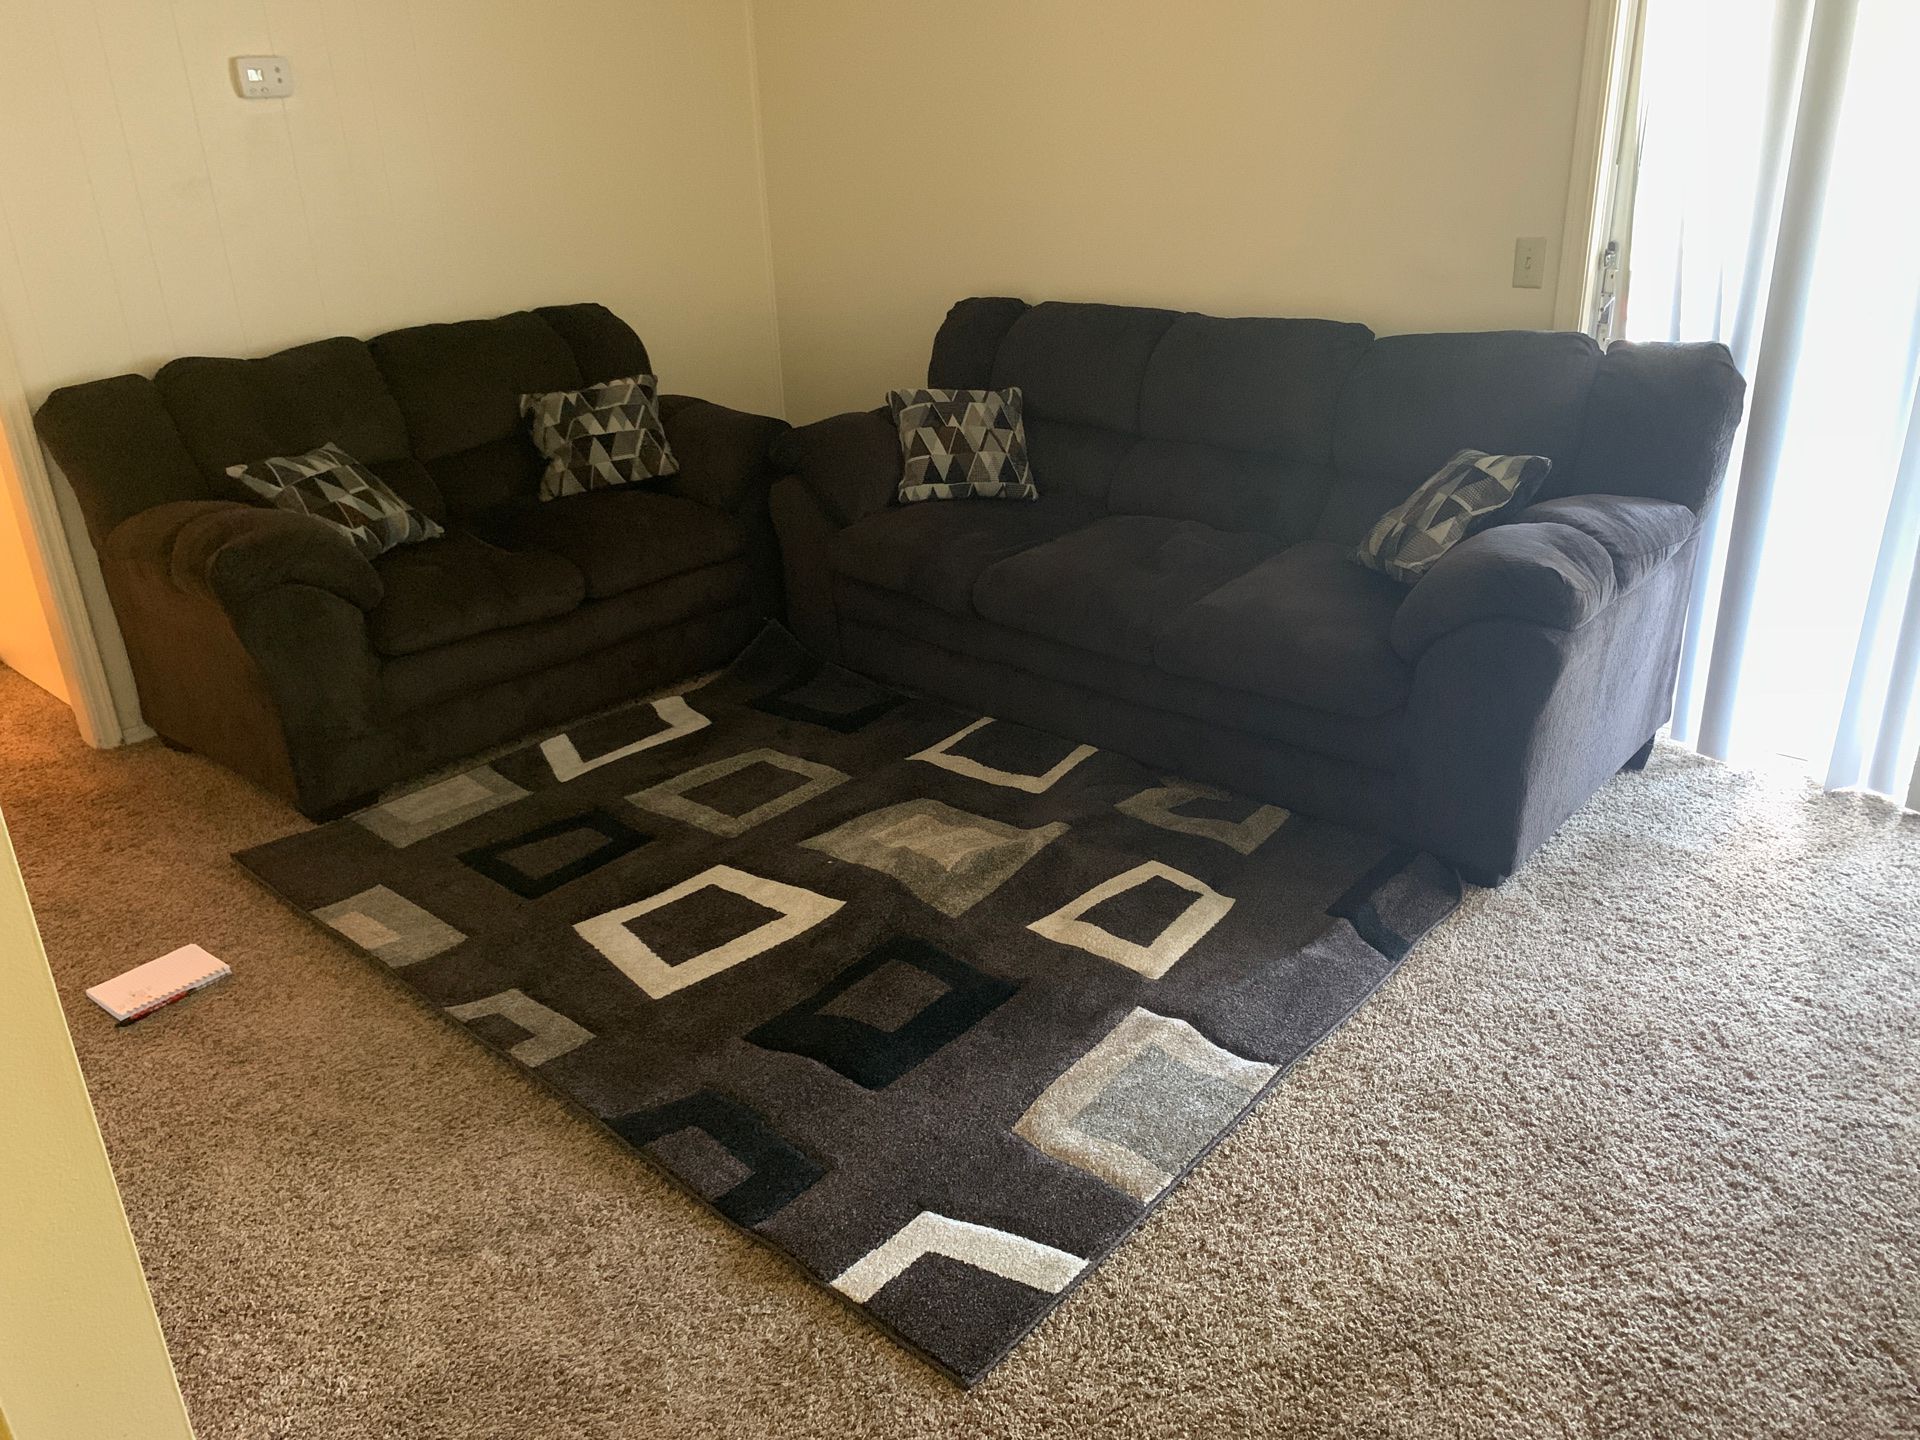 Couches and rug